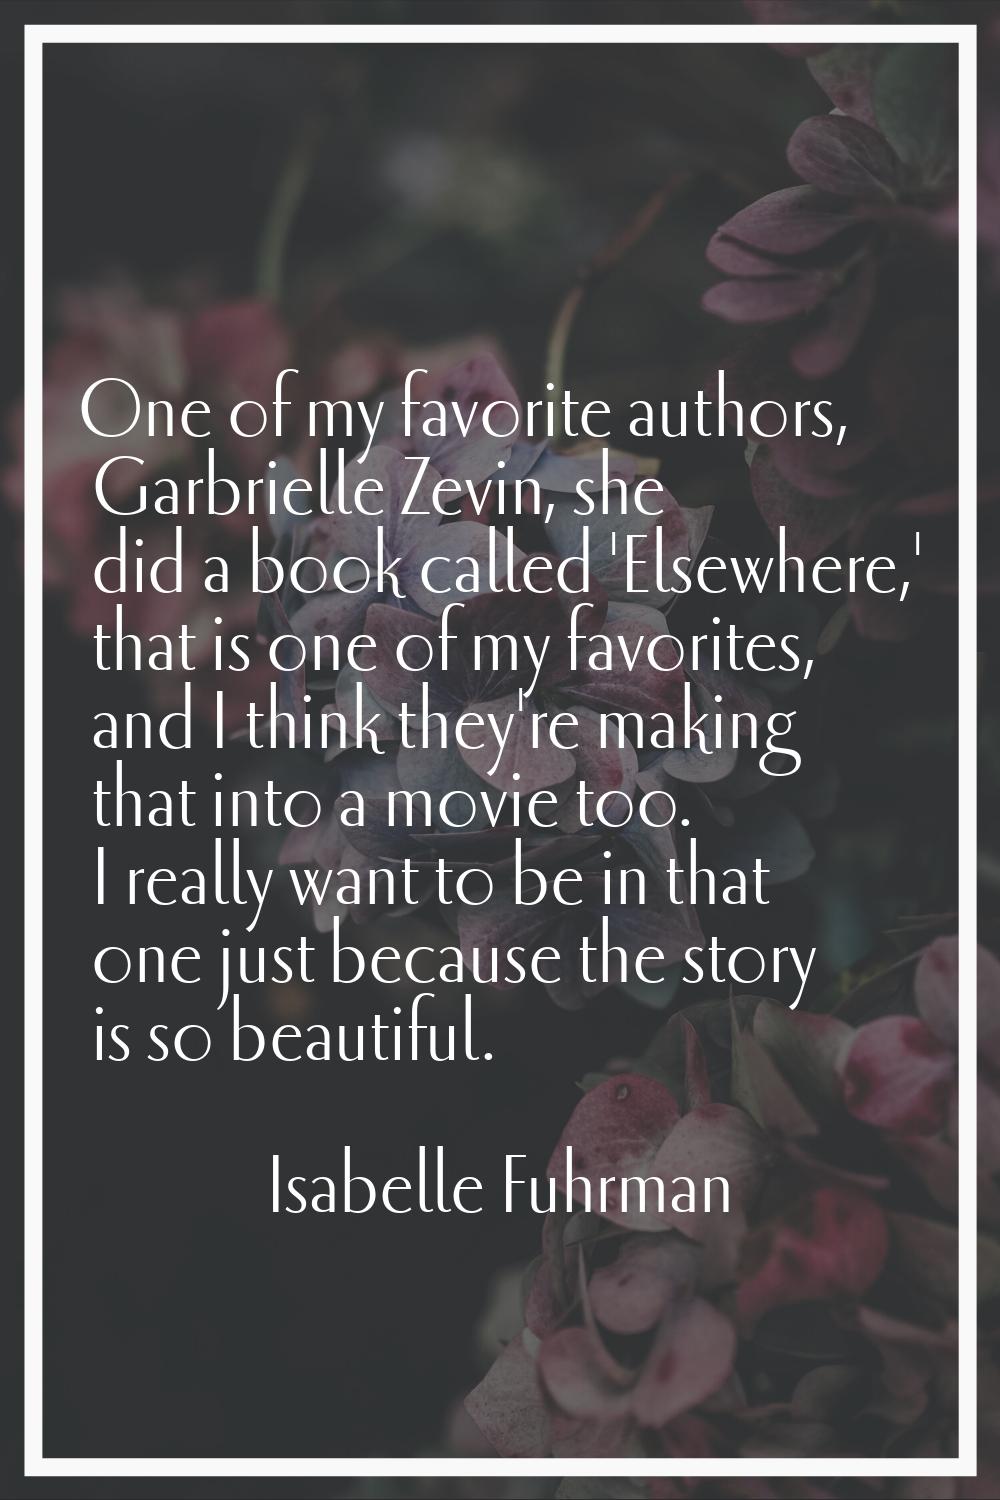 One of my favorite authors, Garbrielle Zevin, she did a book called 'Elsewhere,' that is one of my 